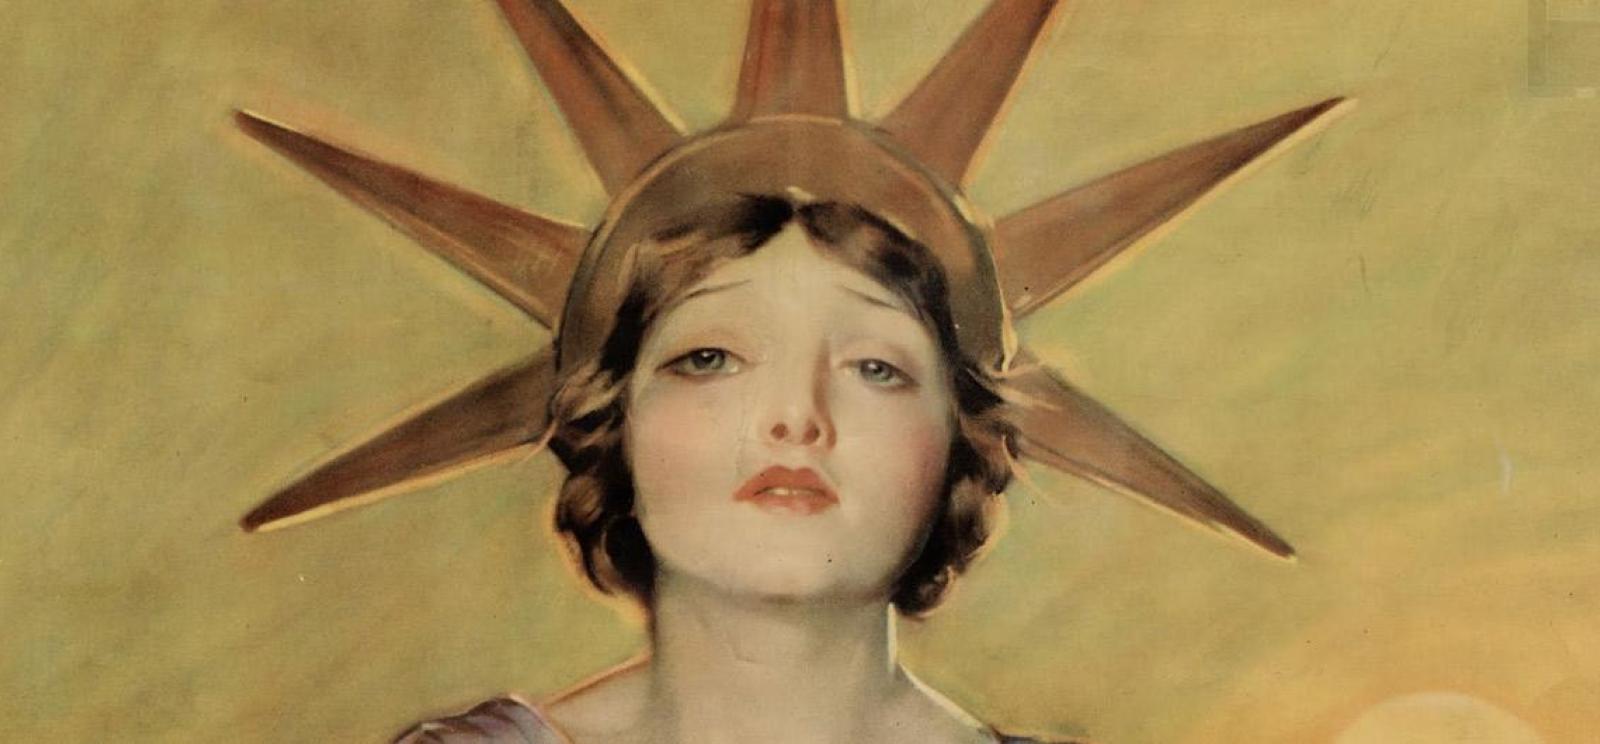 Painting of a young white woman from the neck up. She has short brown hair and wears a crown of rays similar to the Statue of Liberty.